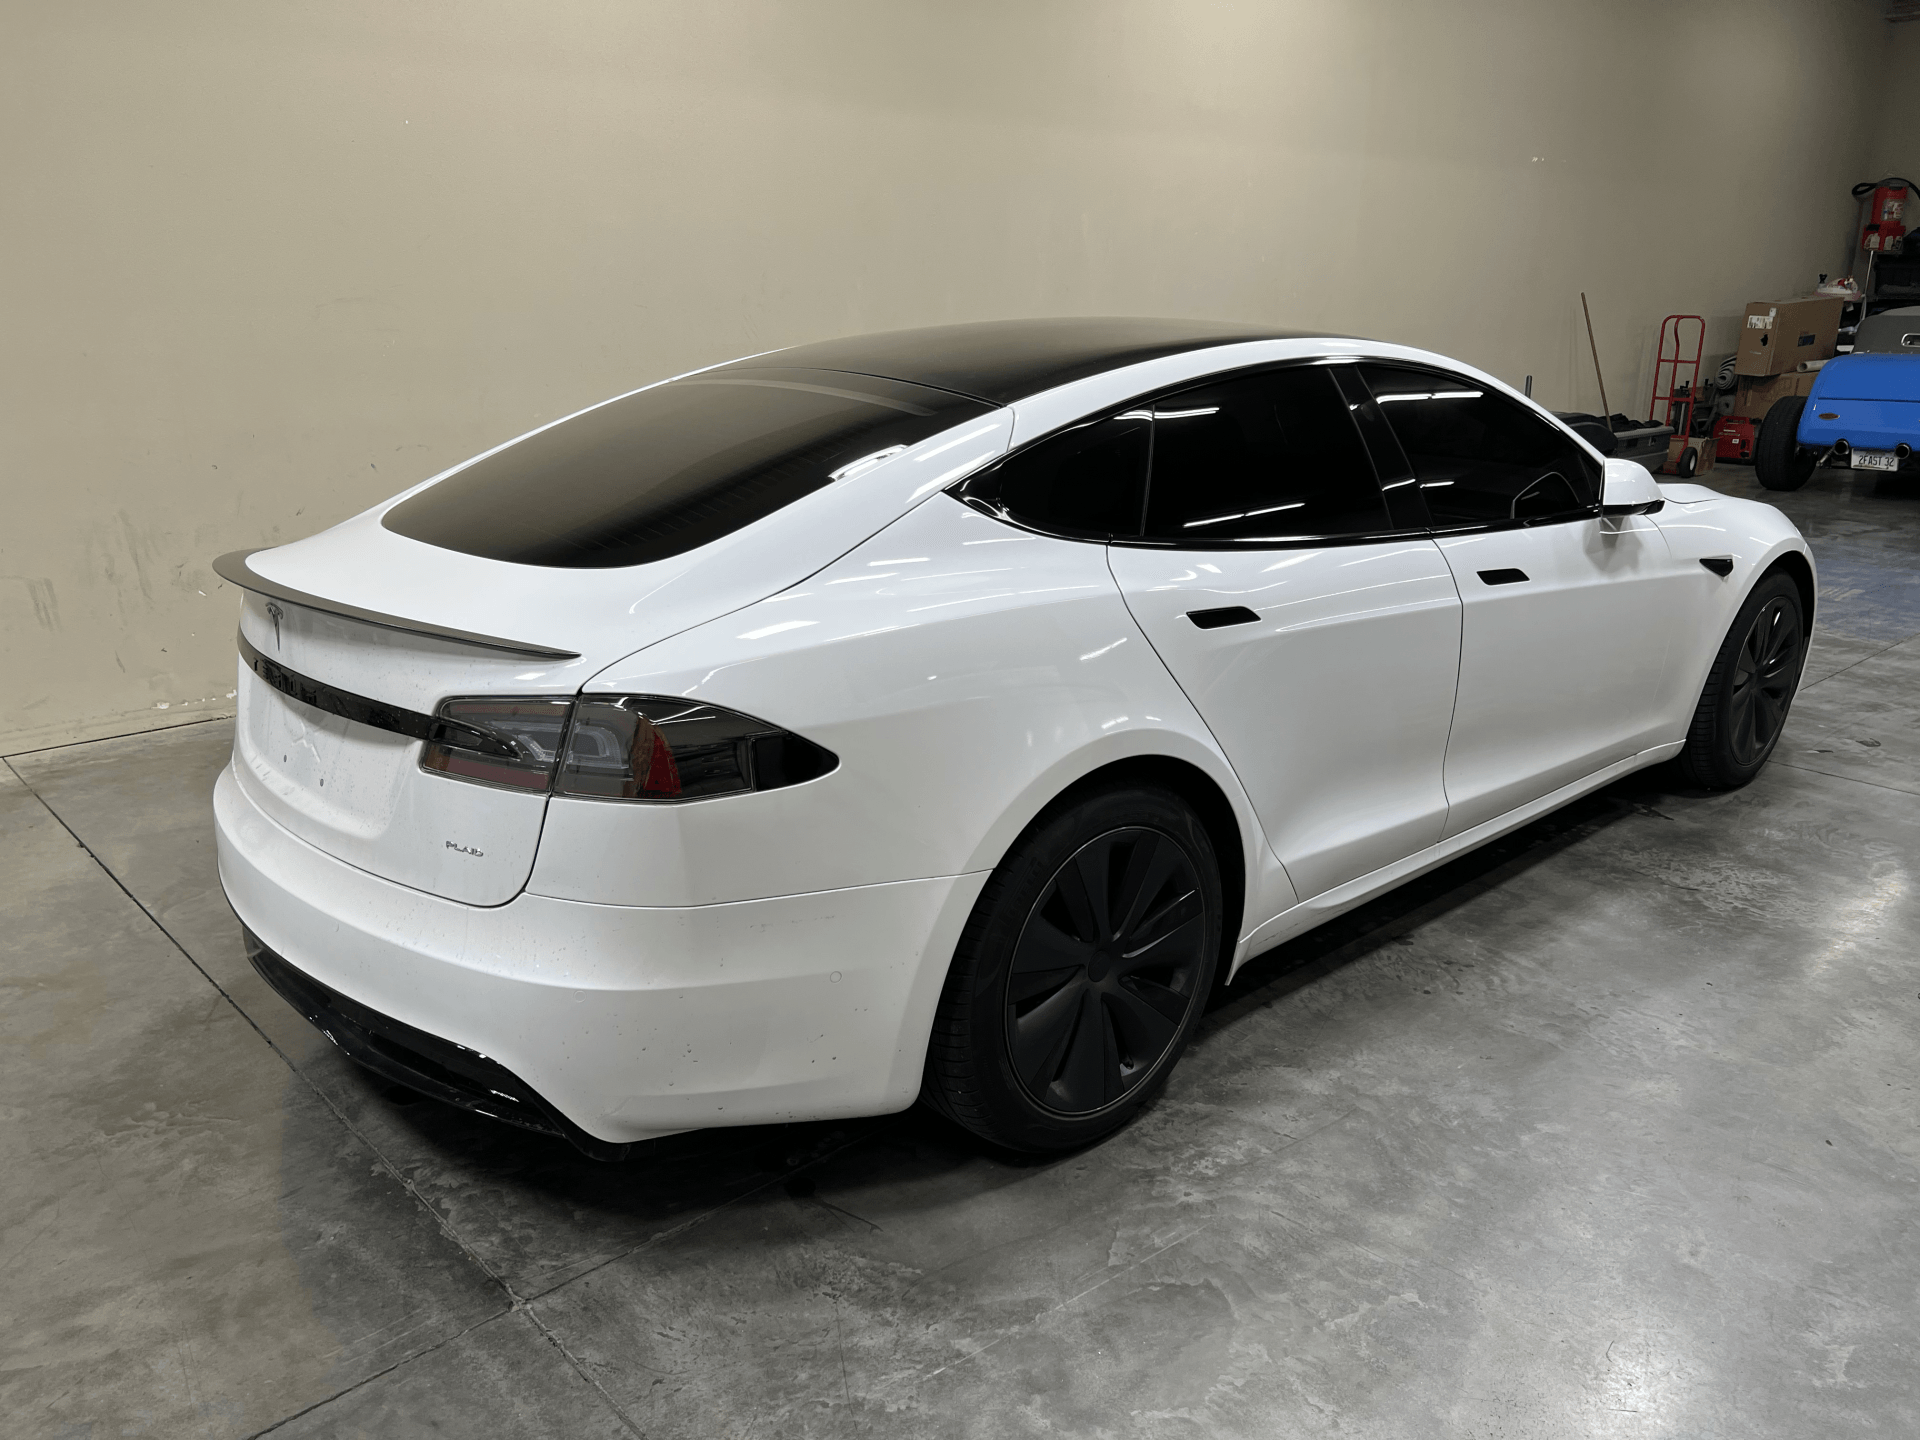 A Tinted Sports Car | Billings, MT | Tint Guy